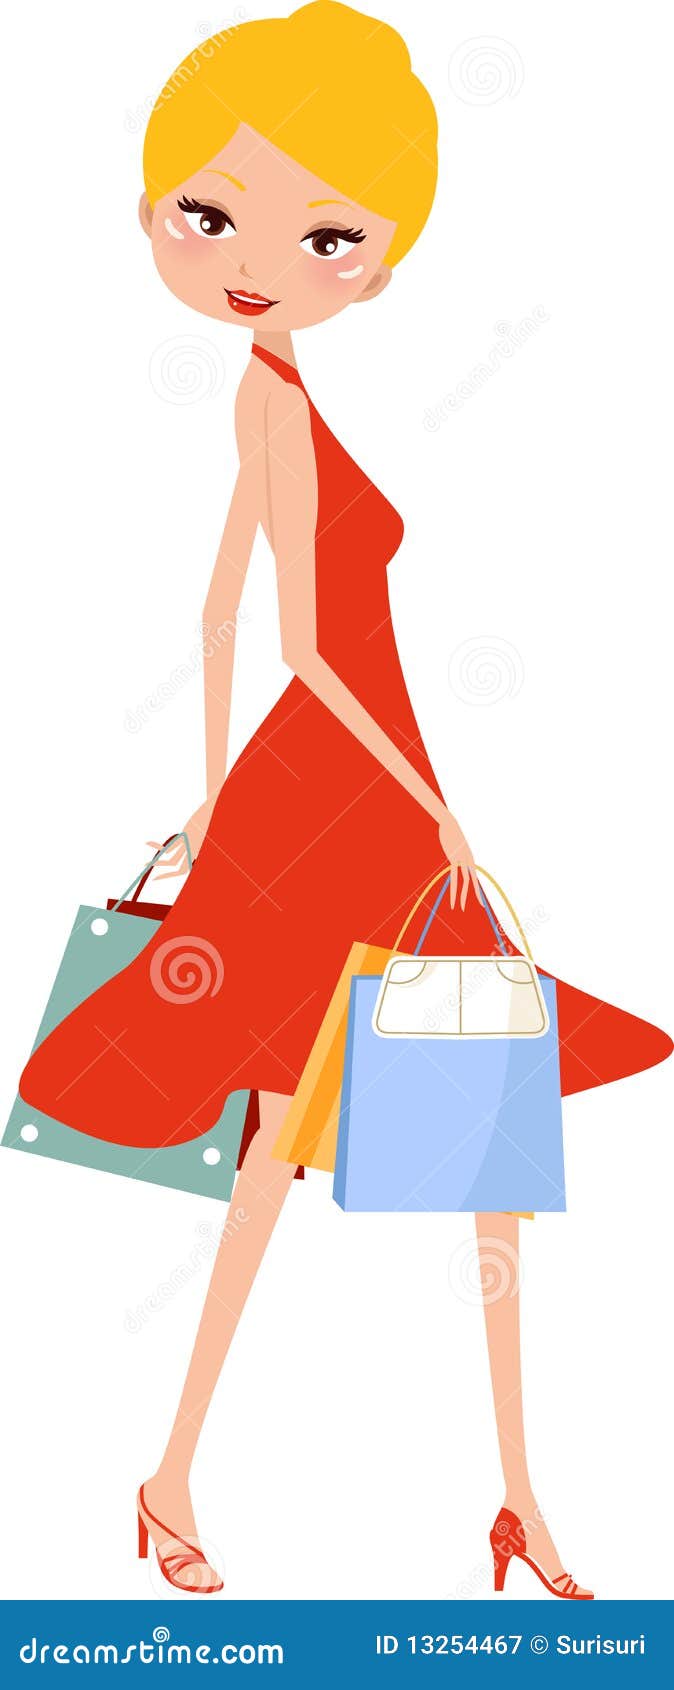 Girl and shopping bag stock vector. Illustration of lady - 13254467